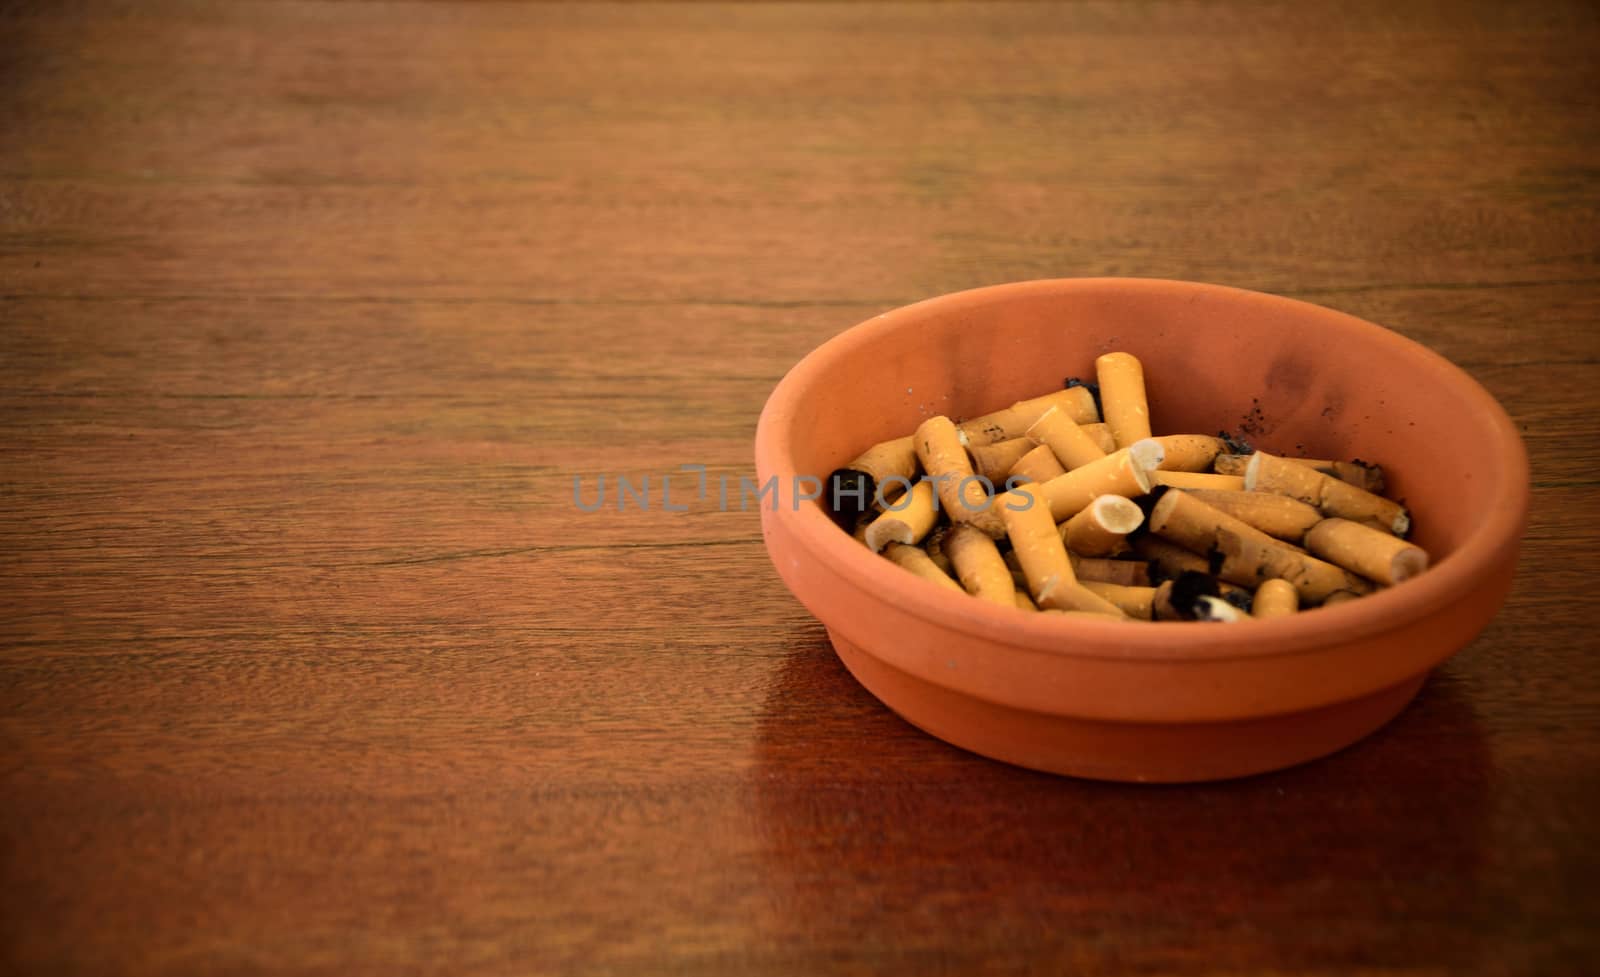 An ash tray full of cigarettes